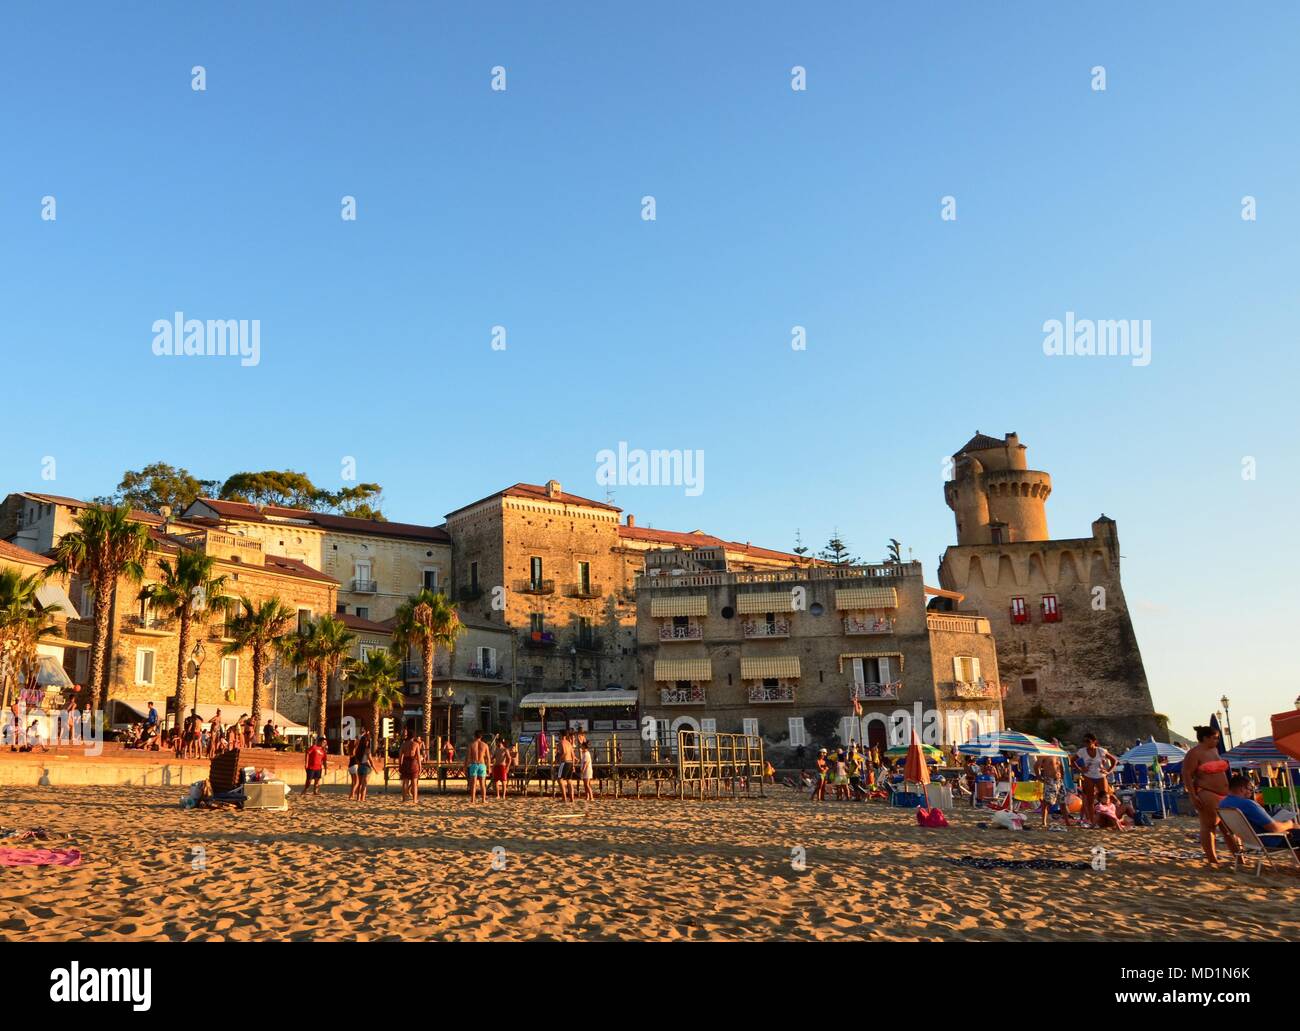 Santa Maria di Castellabate, Campania region, Italy August 15 2016. The  main beach overlooked by the tower of Il Palazzo Belmonte Stock Photo -  Alamy